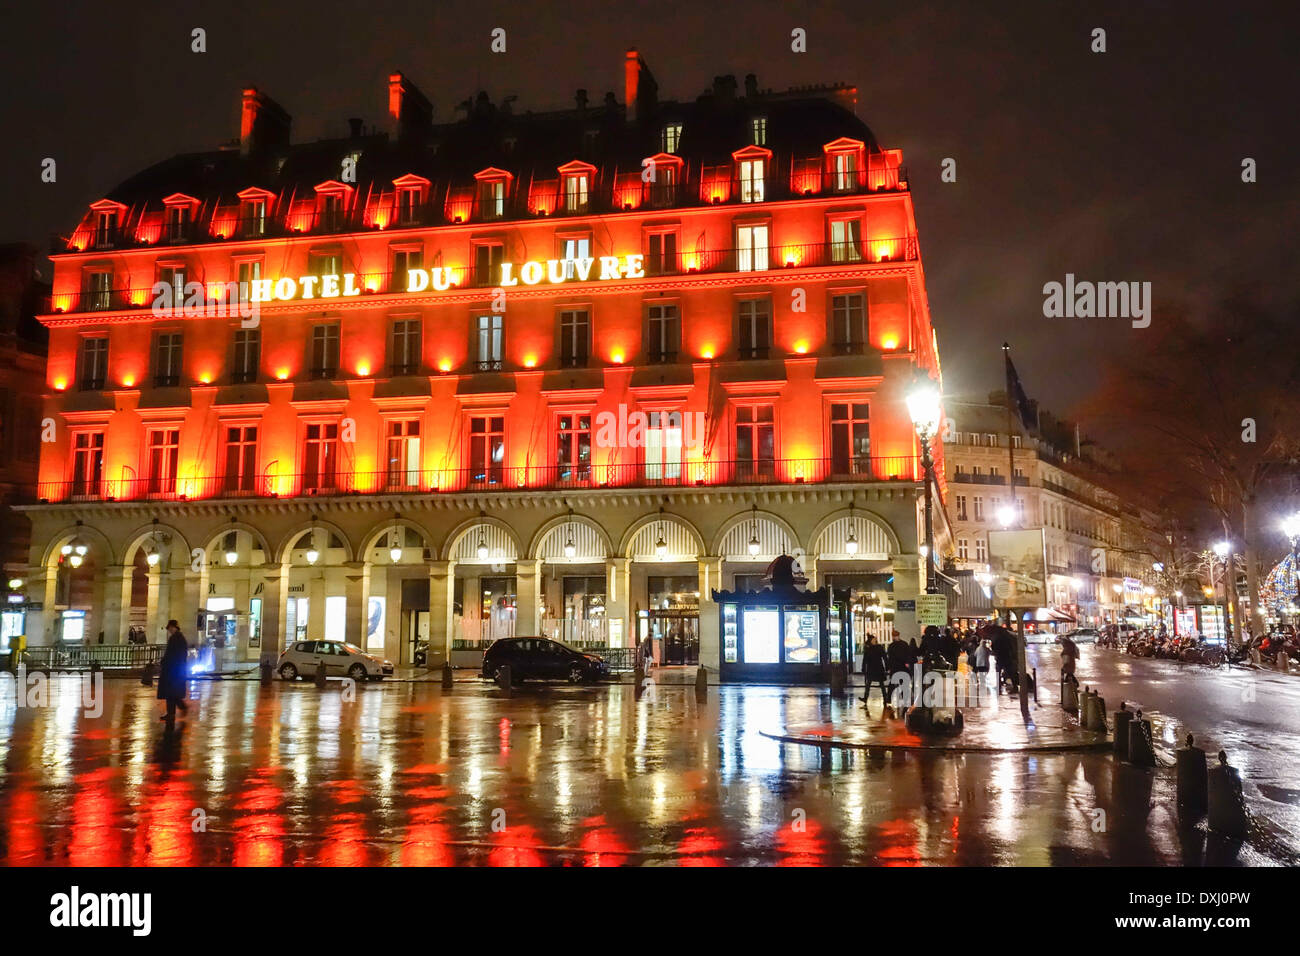 Exterior of the Hotel du Louvre on a wet winter's evening, Paris, France Stock Photo